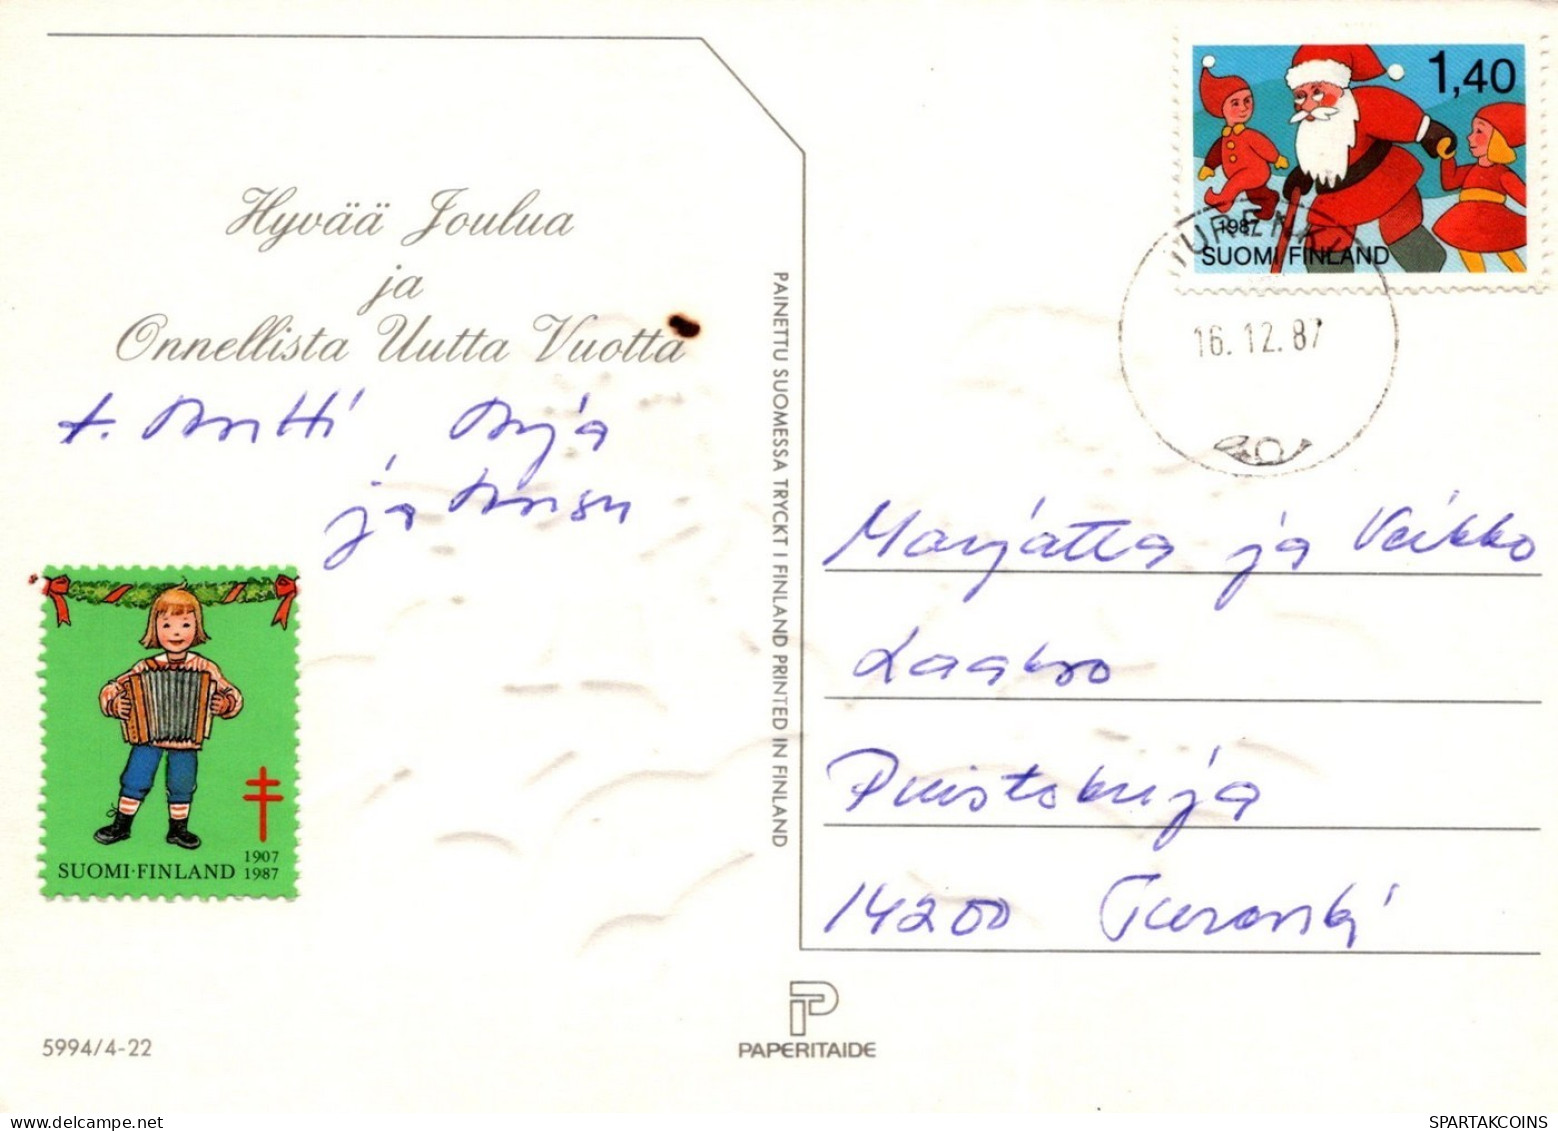 ANGELO Buon Anno Natale Vintage Cartolina CPSM #PAH031.A - Anges